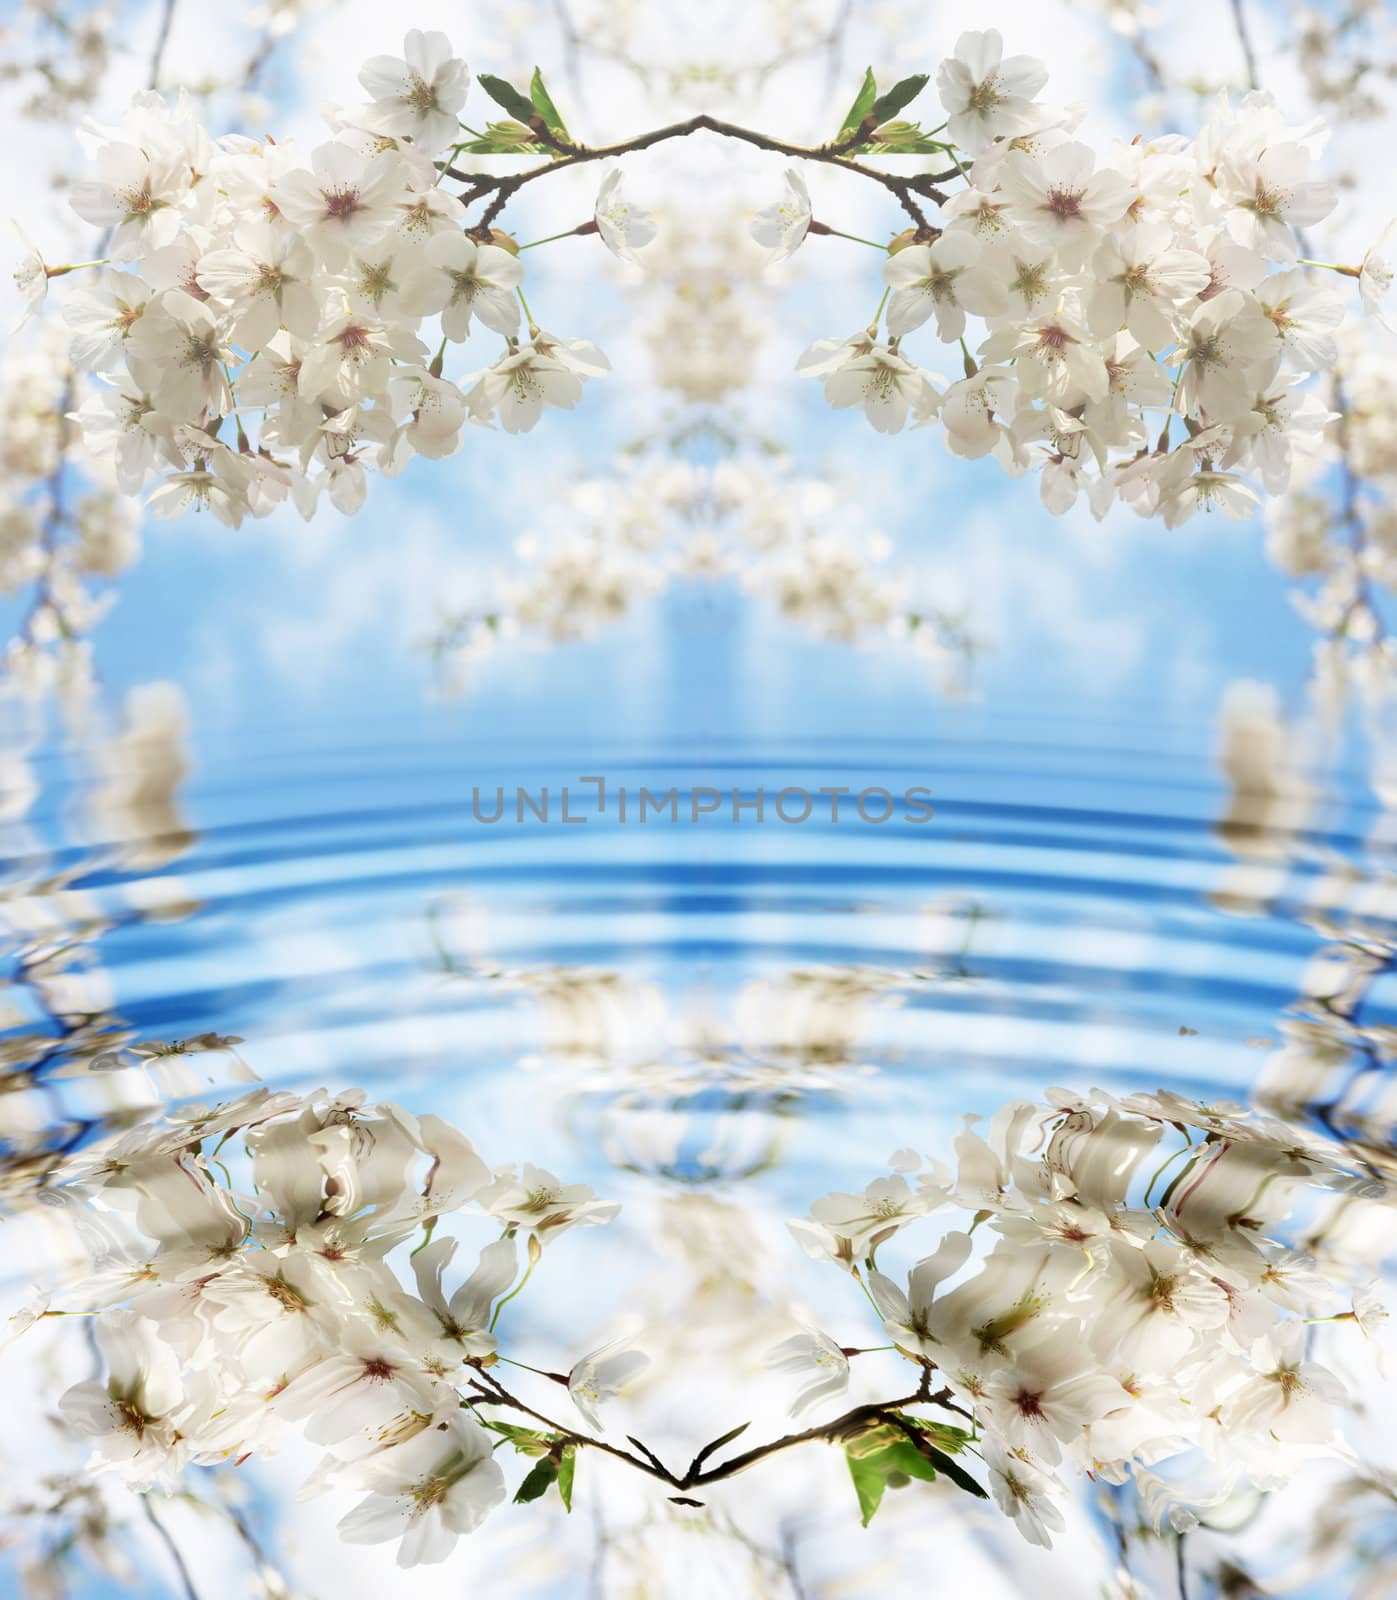 beautiful apanese cherry blossoms reflected in water

